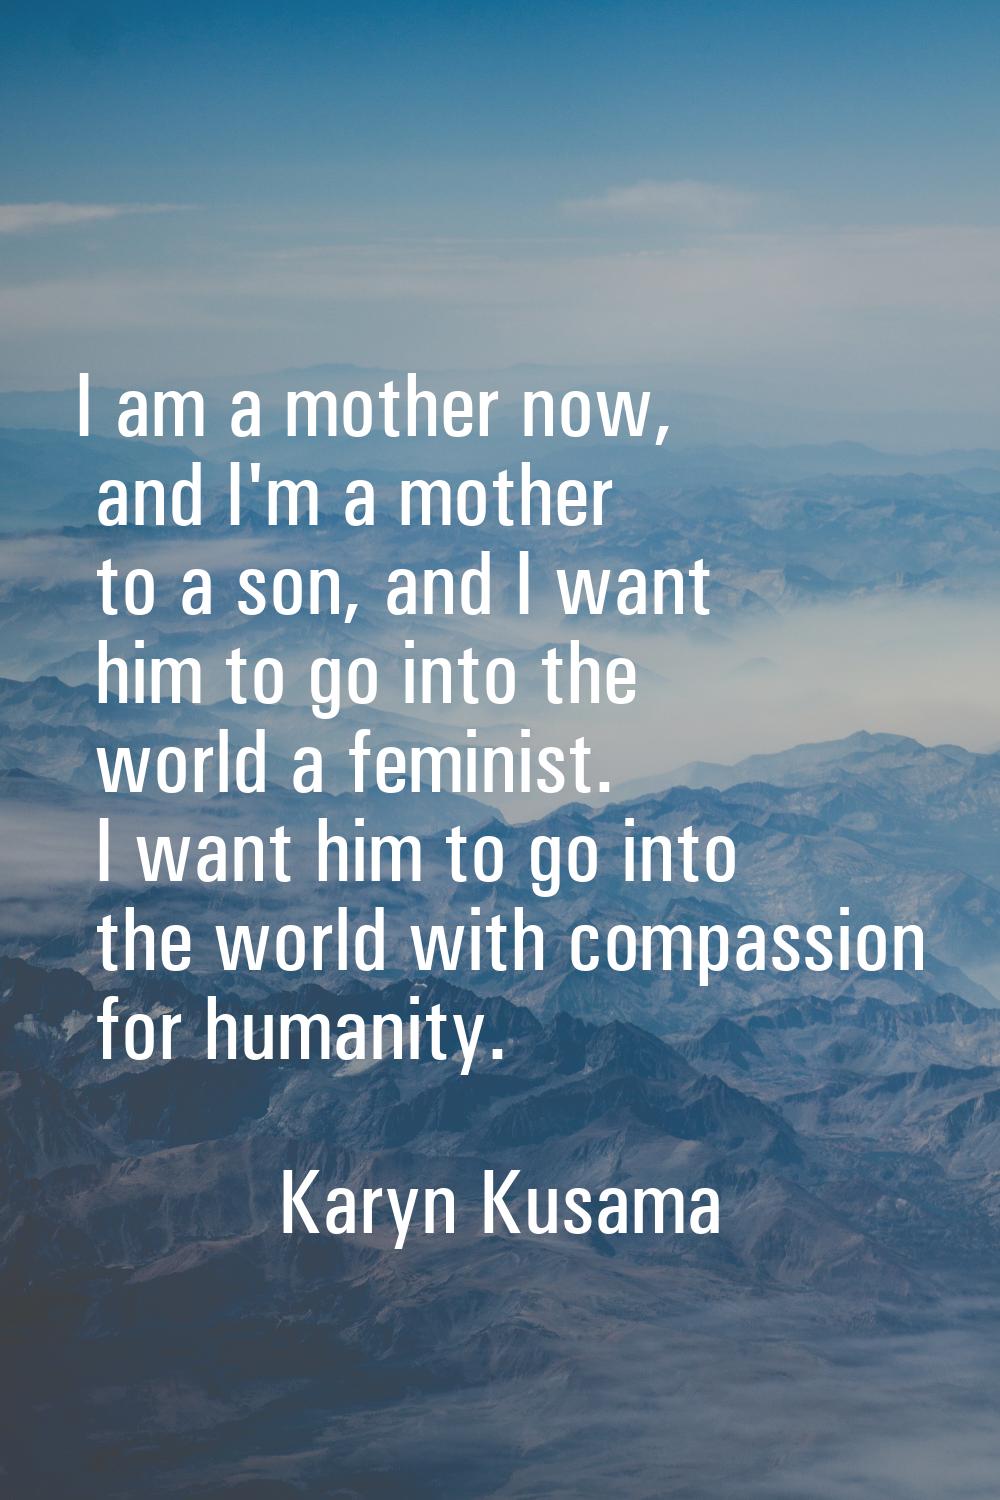 I am a mother now, and I'm a mother to a son, and I want him to go into the world a feminist. I wan